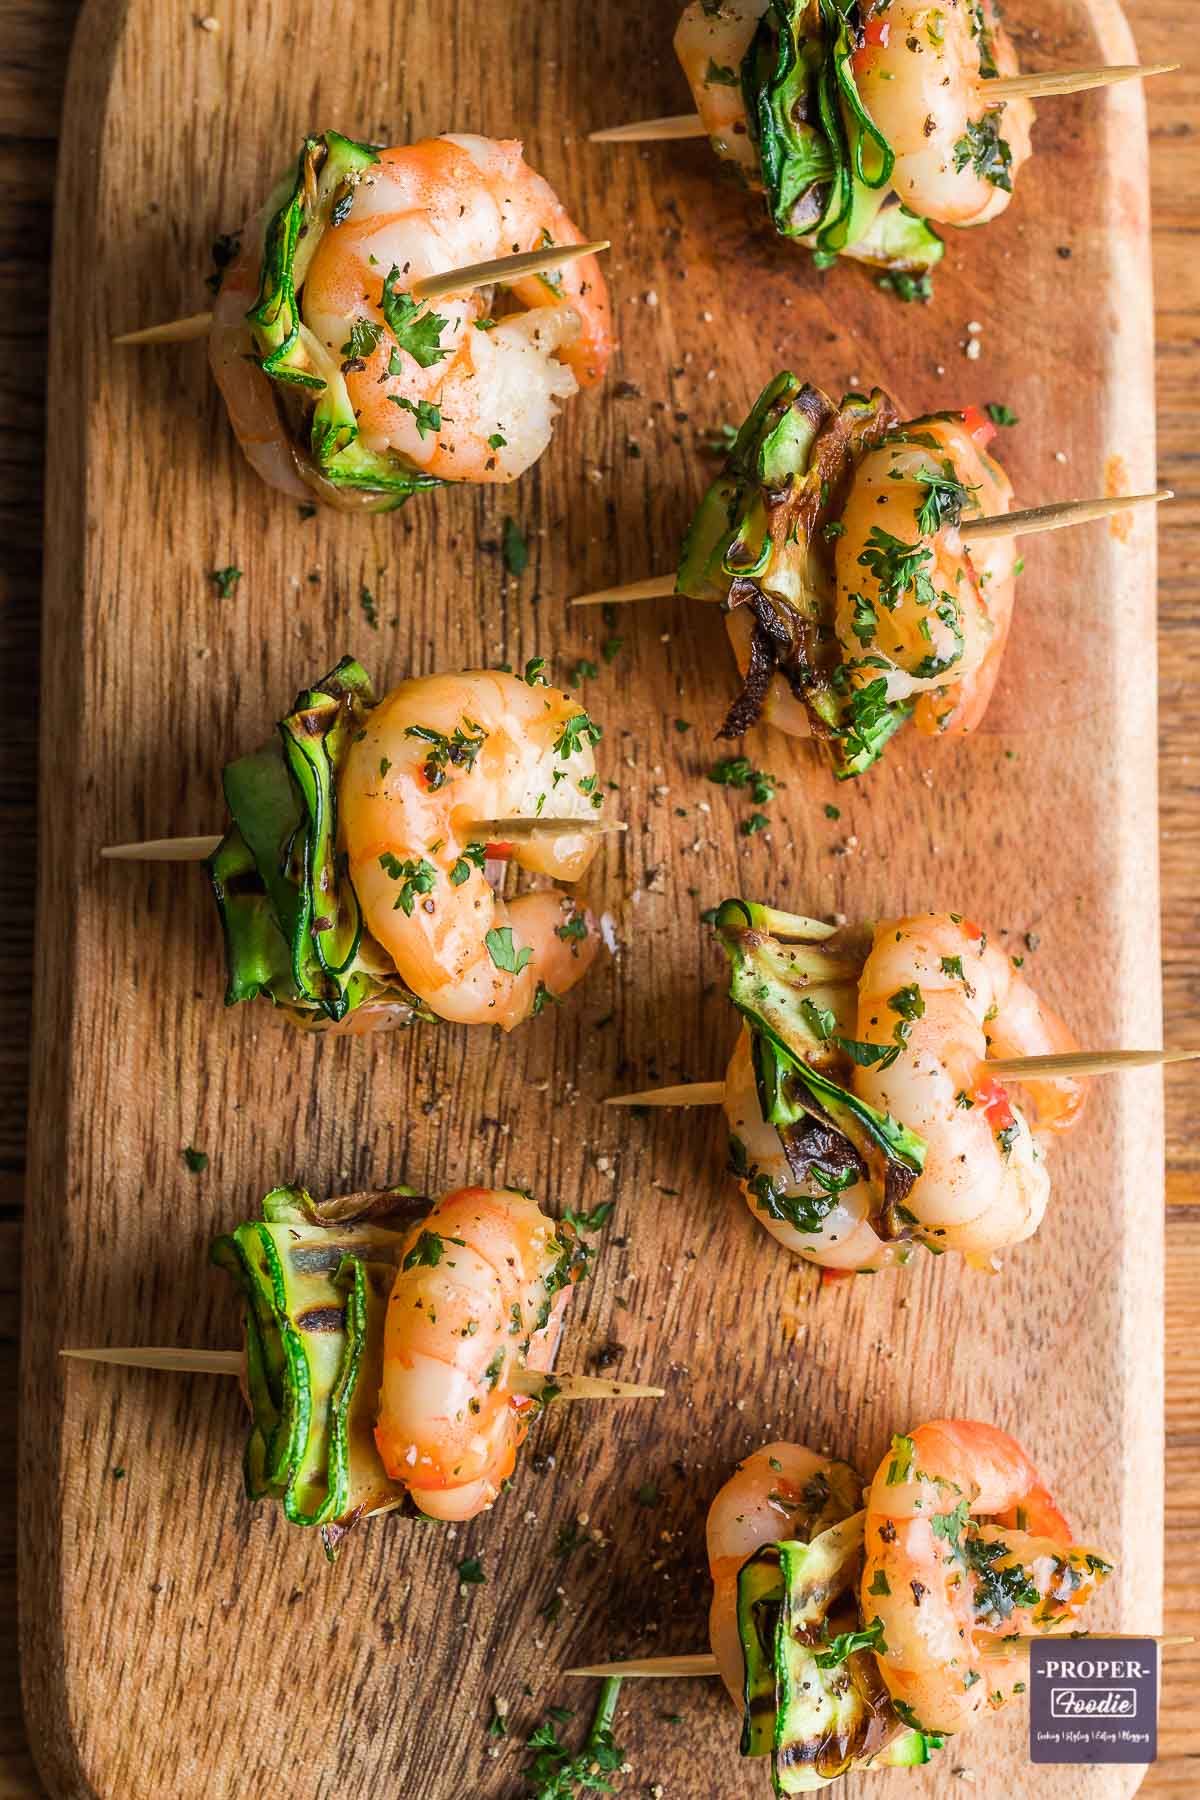 Honey, chilli and garlic king prawns skewered on cocktail sticks with pan fried courgette.